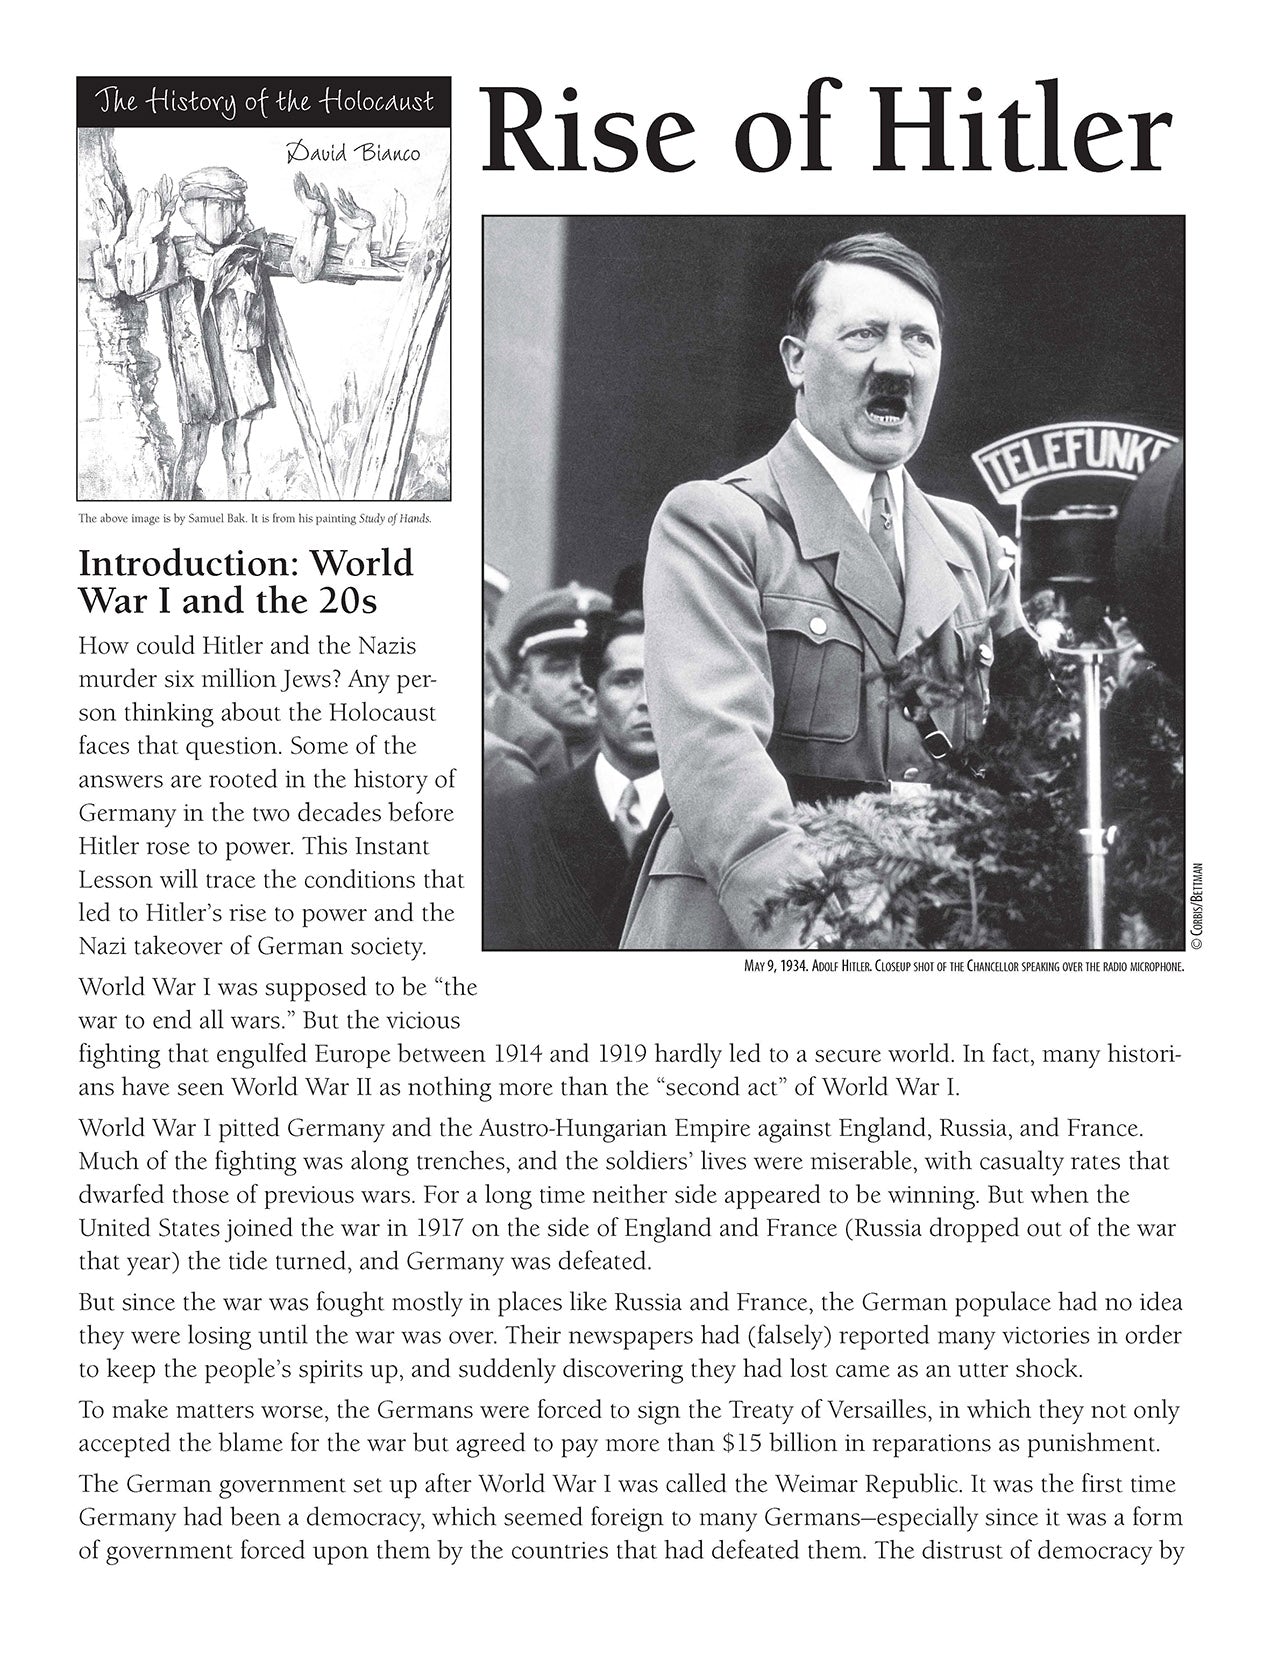 History of the Holocaust: Rise of Hitler